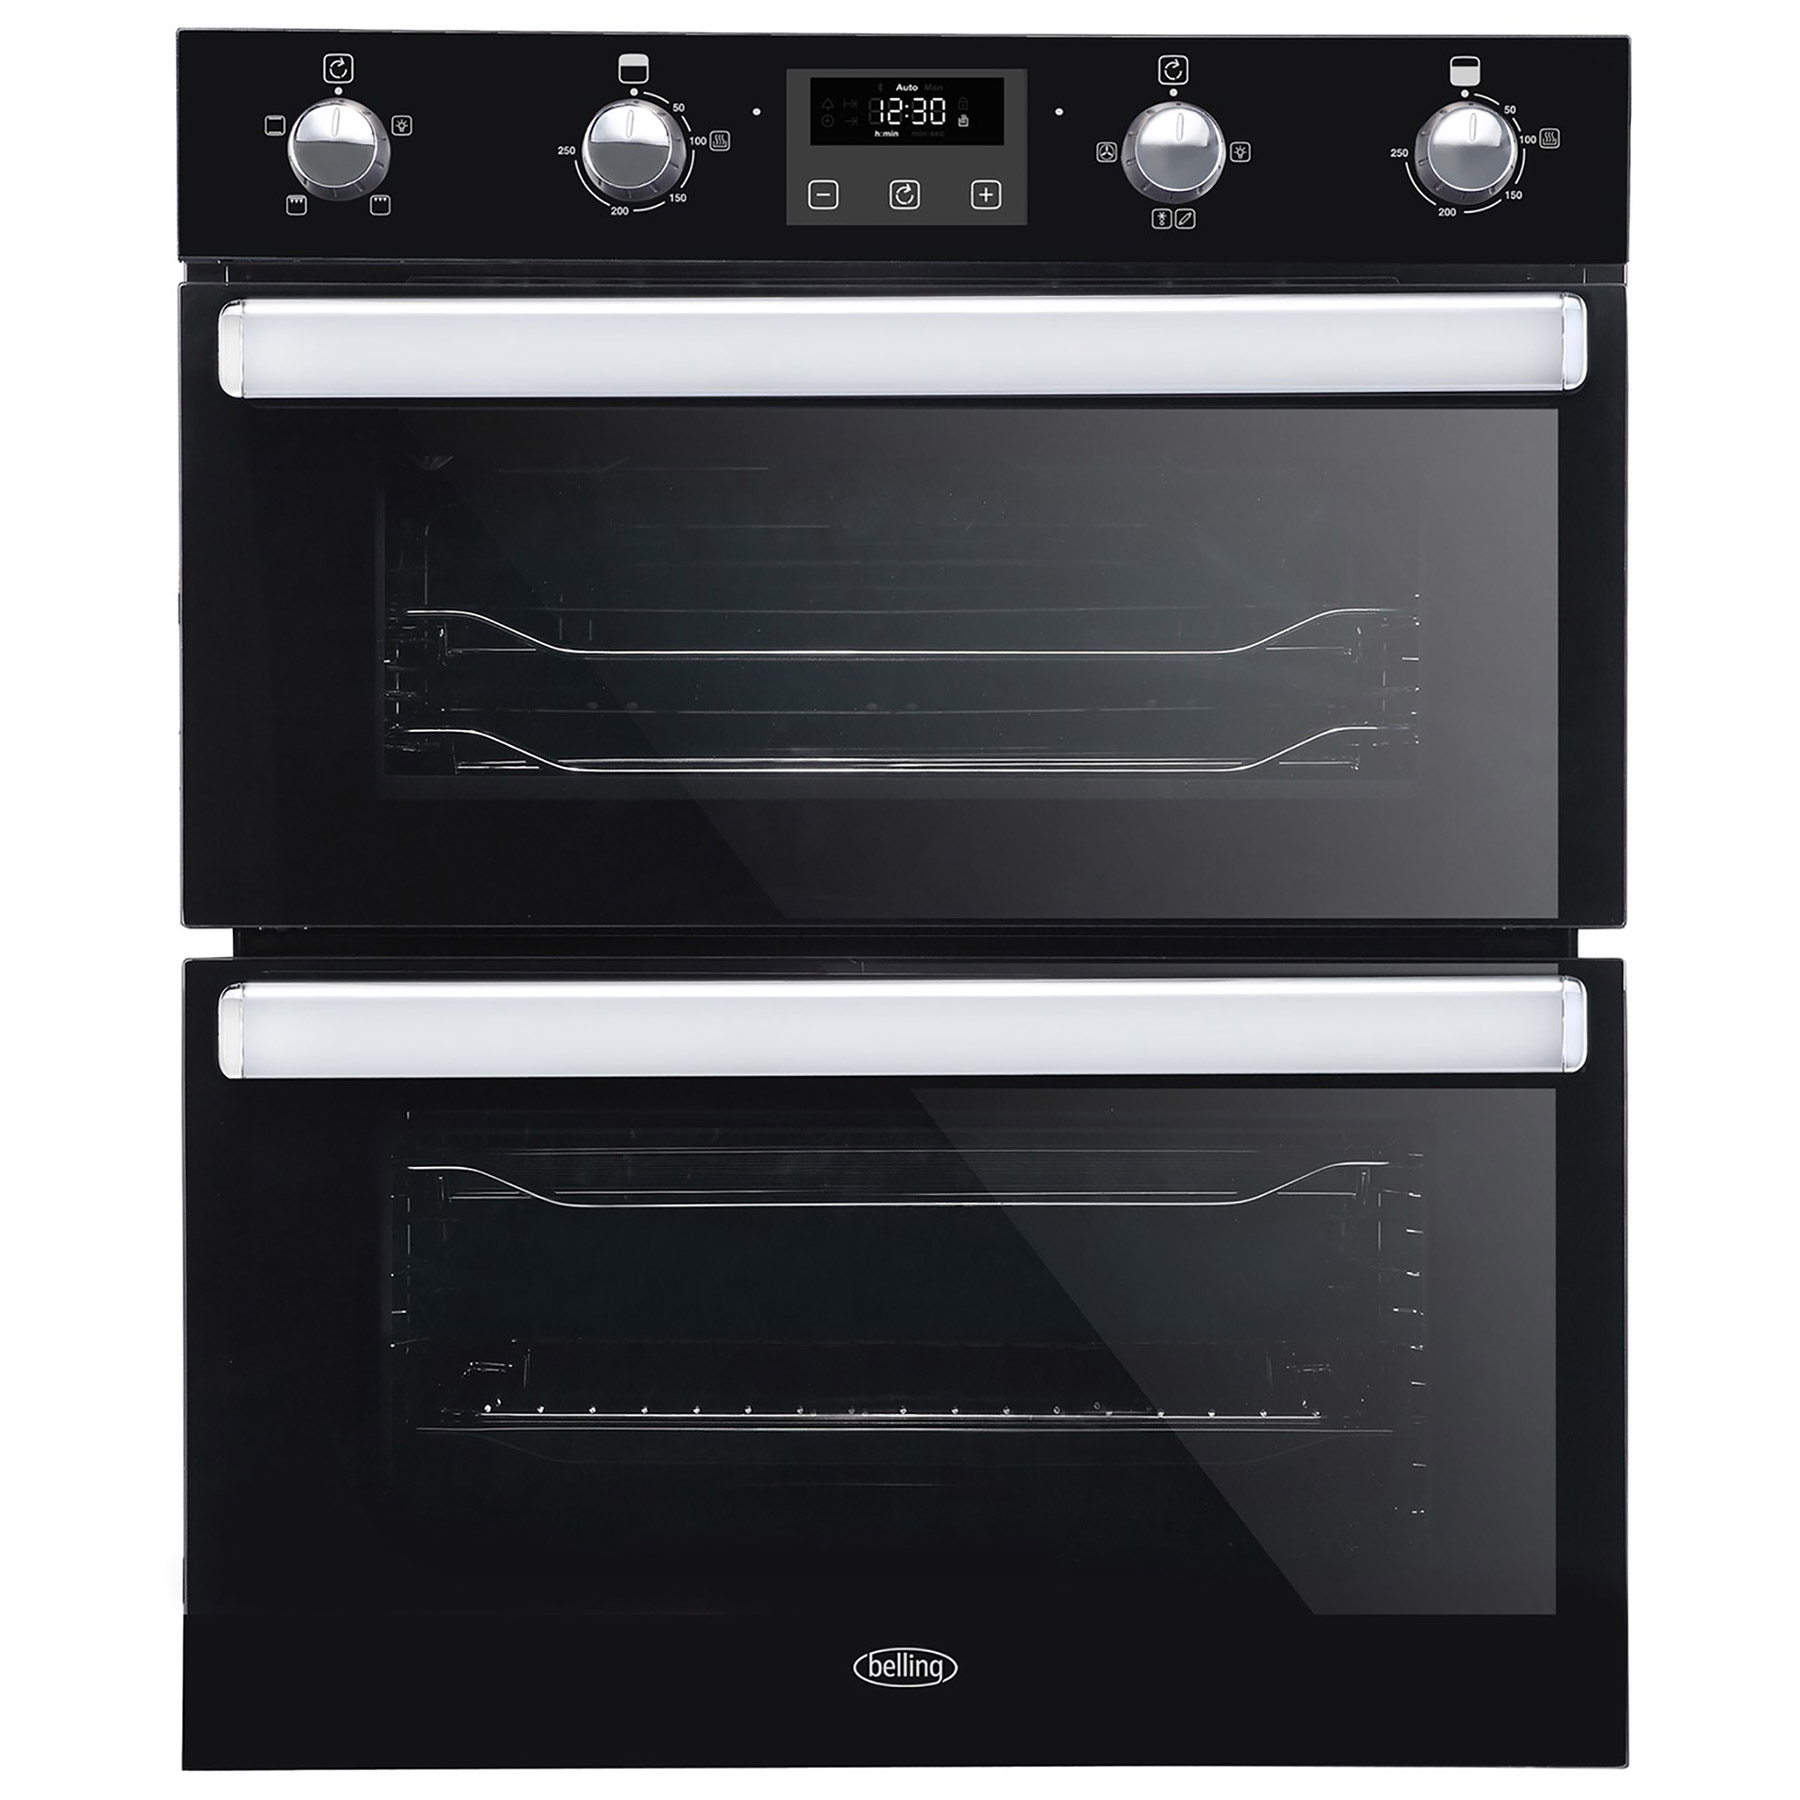 Image of Belling 444444784 70cm Built Under Electric Double Oven Black